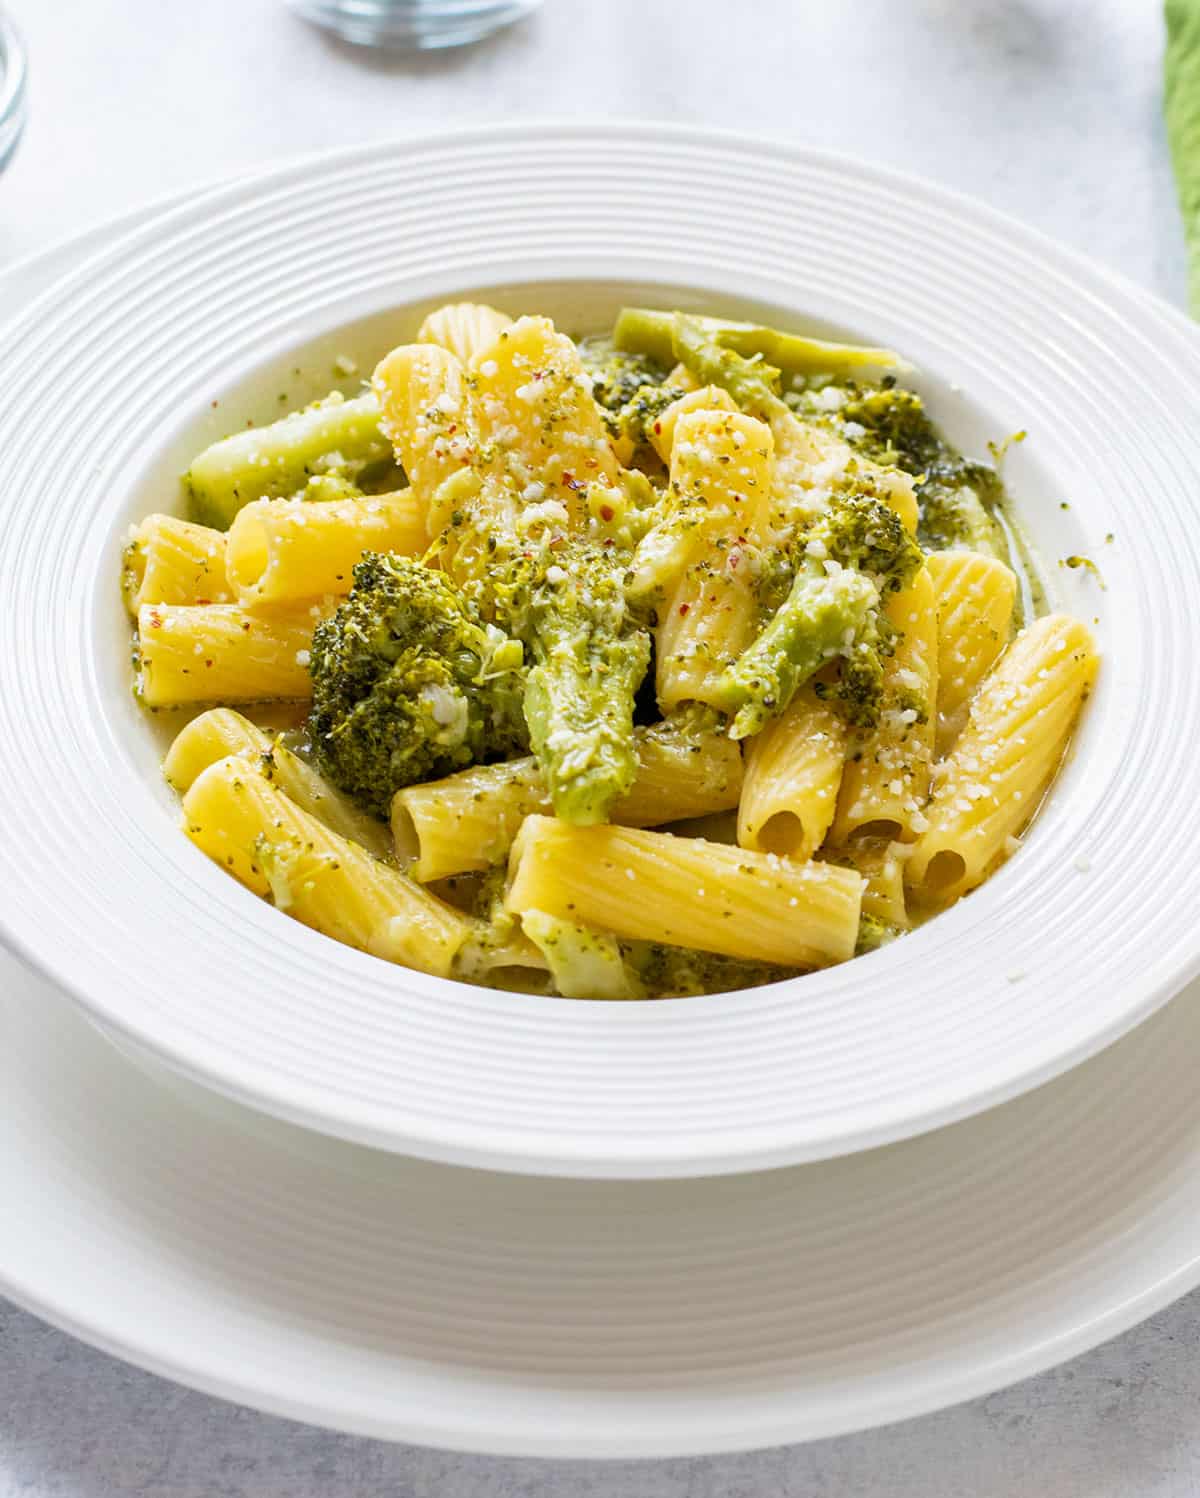 bowl of prepared pasta with broccoli topped with Parmesan cheese.